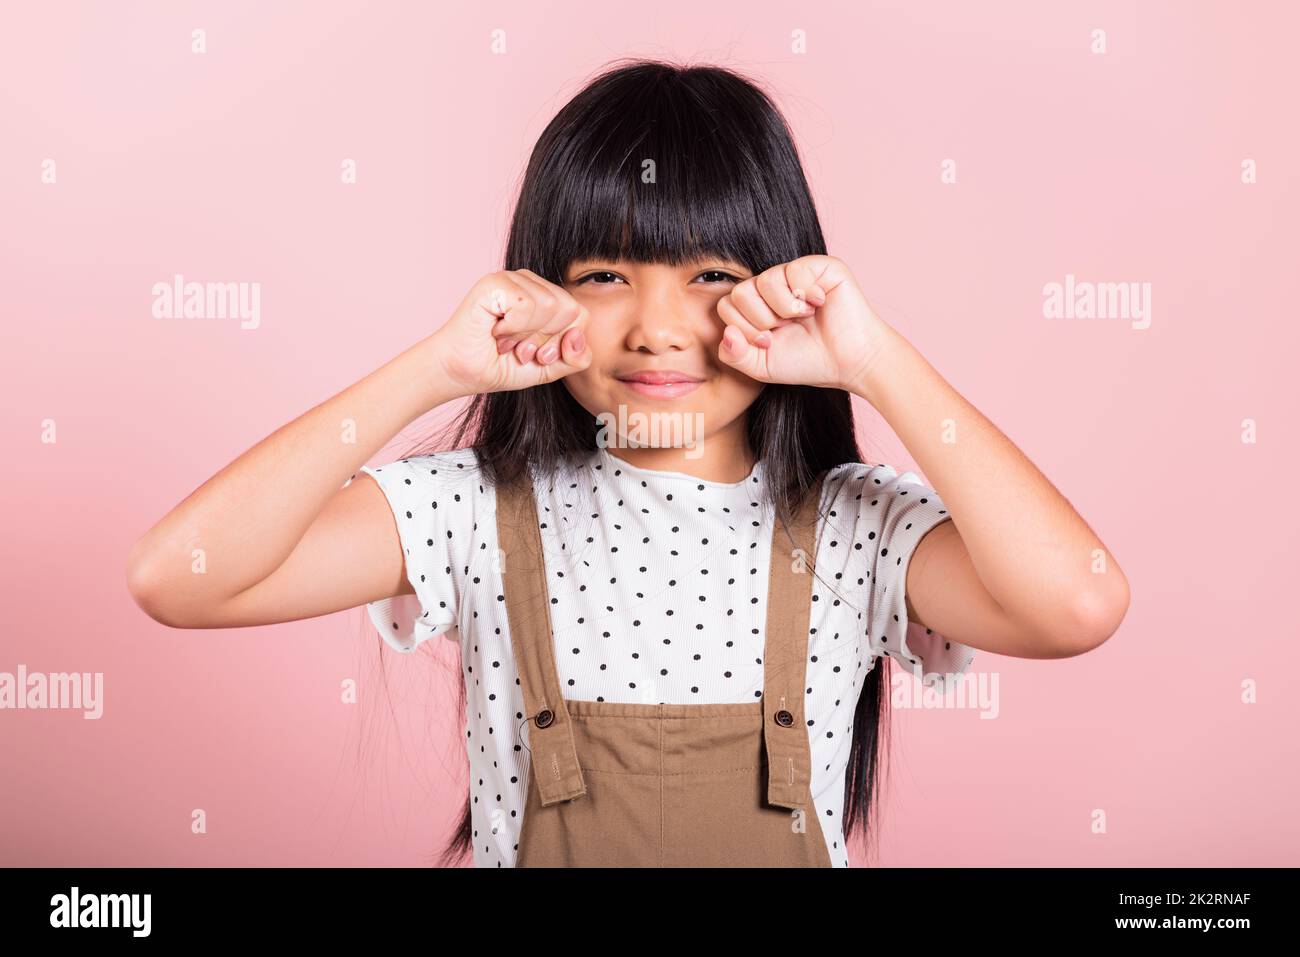 Asian little kid 10 years old bad mood her cry wipe tears with fingers Stock Photo